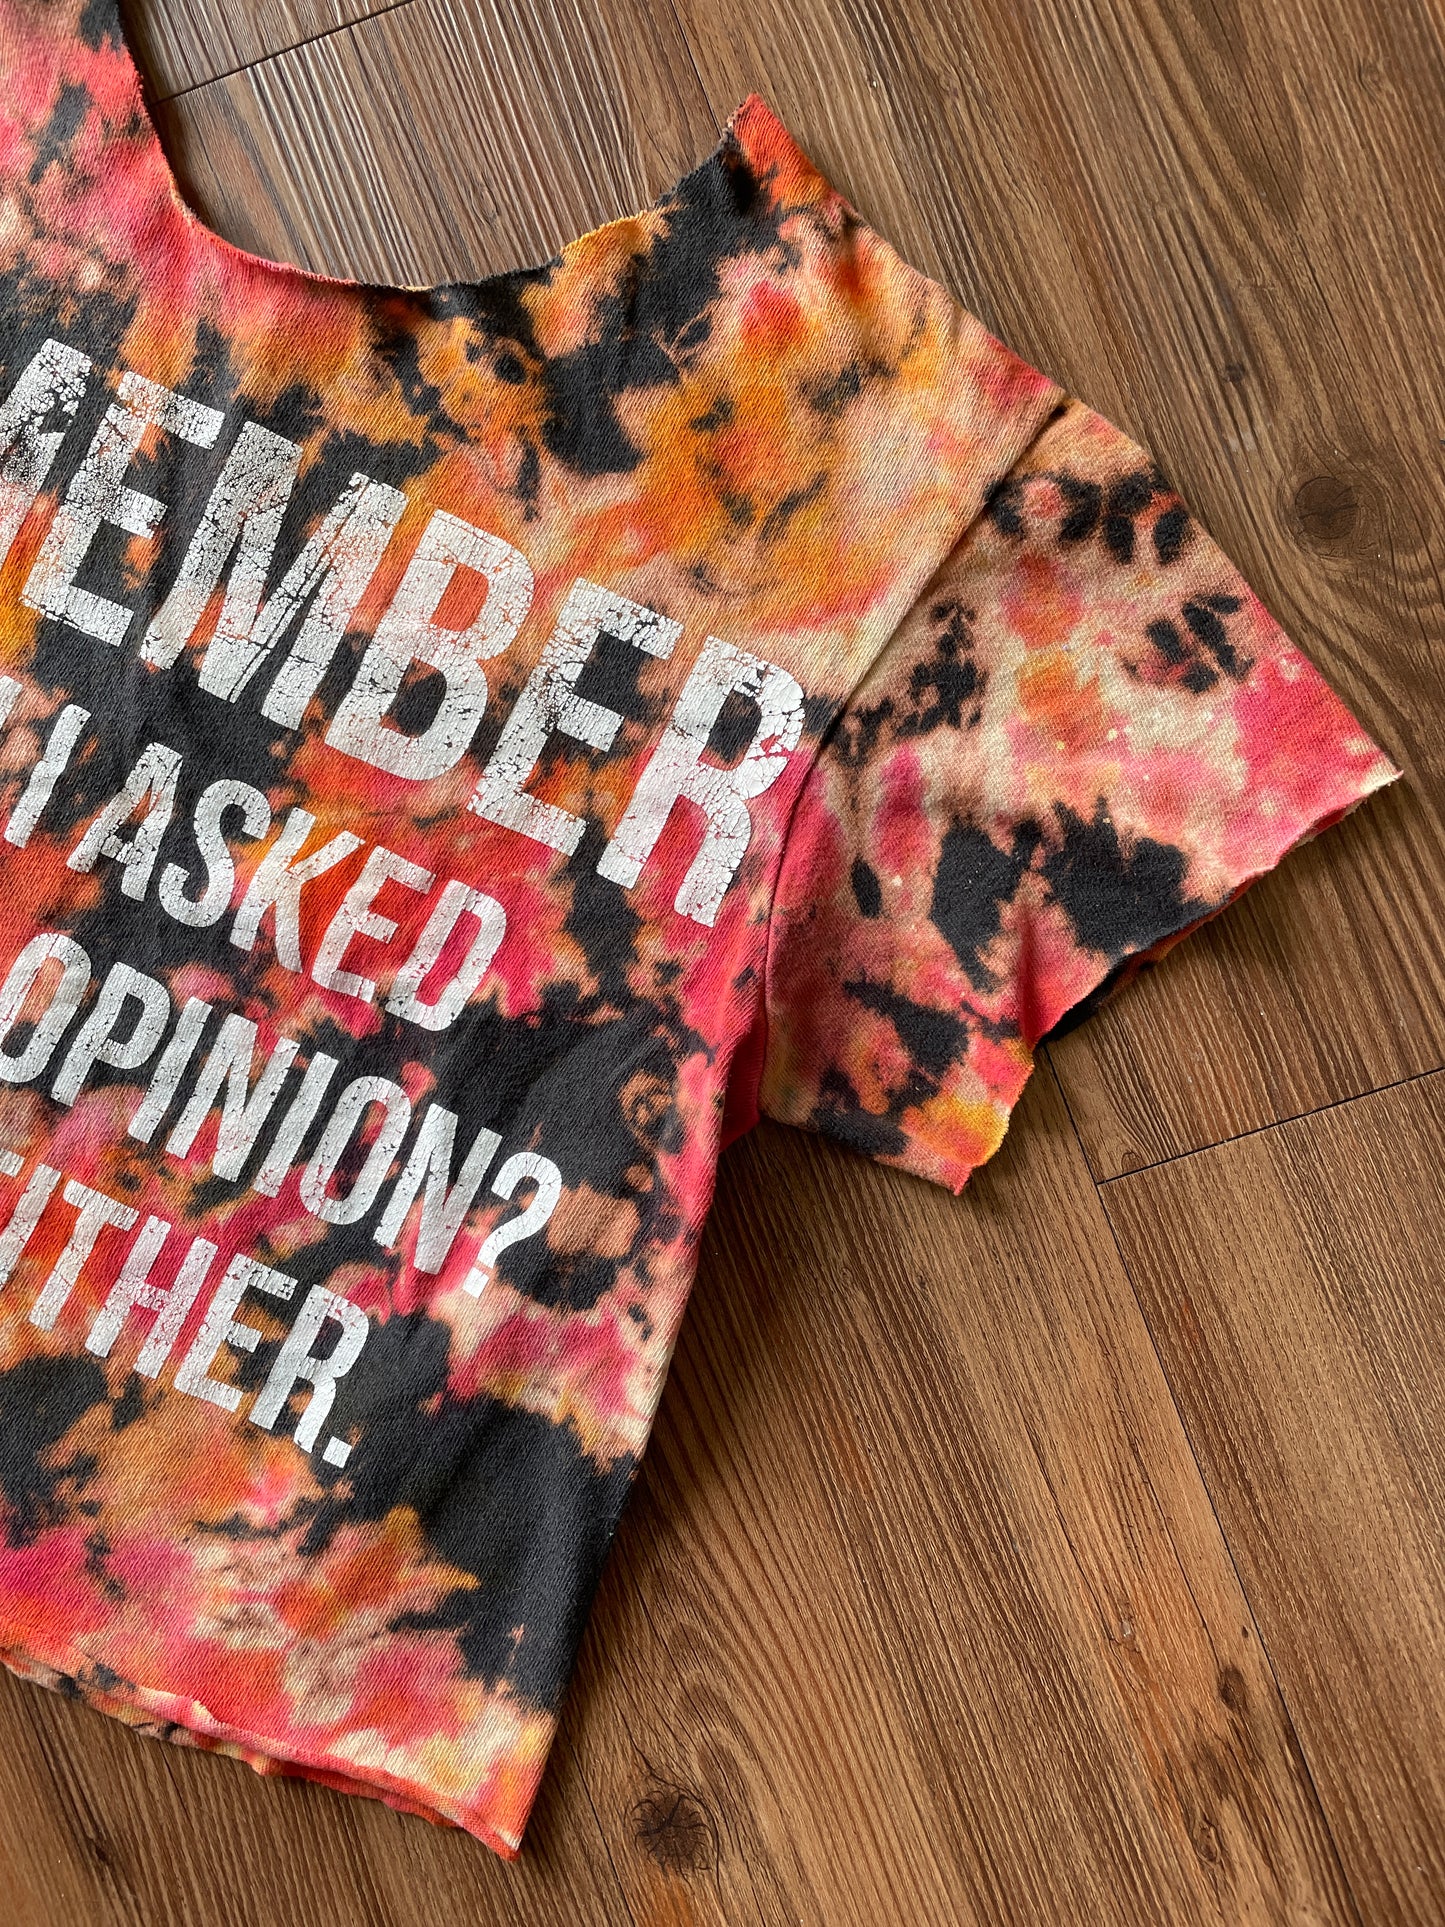 Small Men's Remember When I Asked Your Opinion? Tie Dye Crop Top | Red and Orange Bleach Dye Short Sleeve